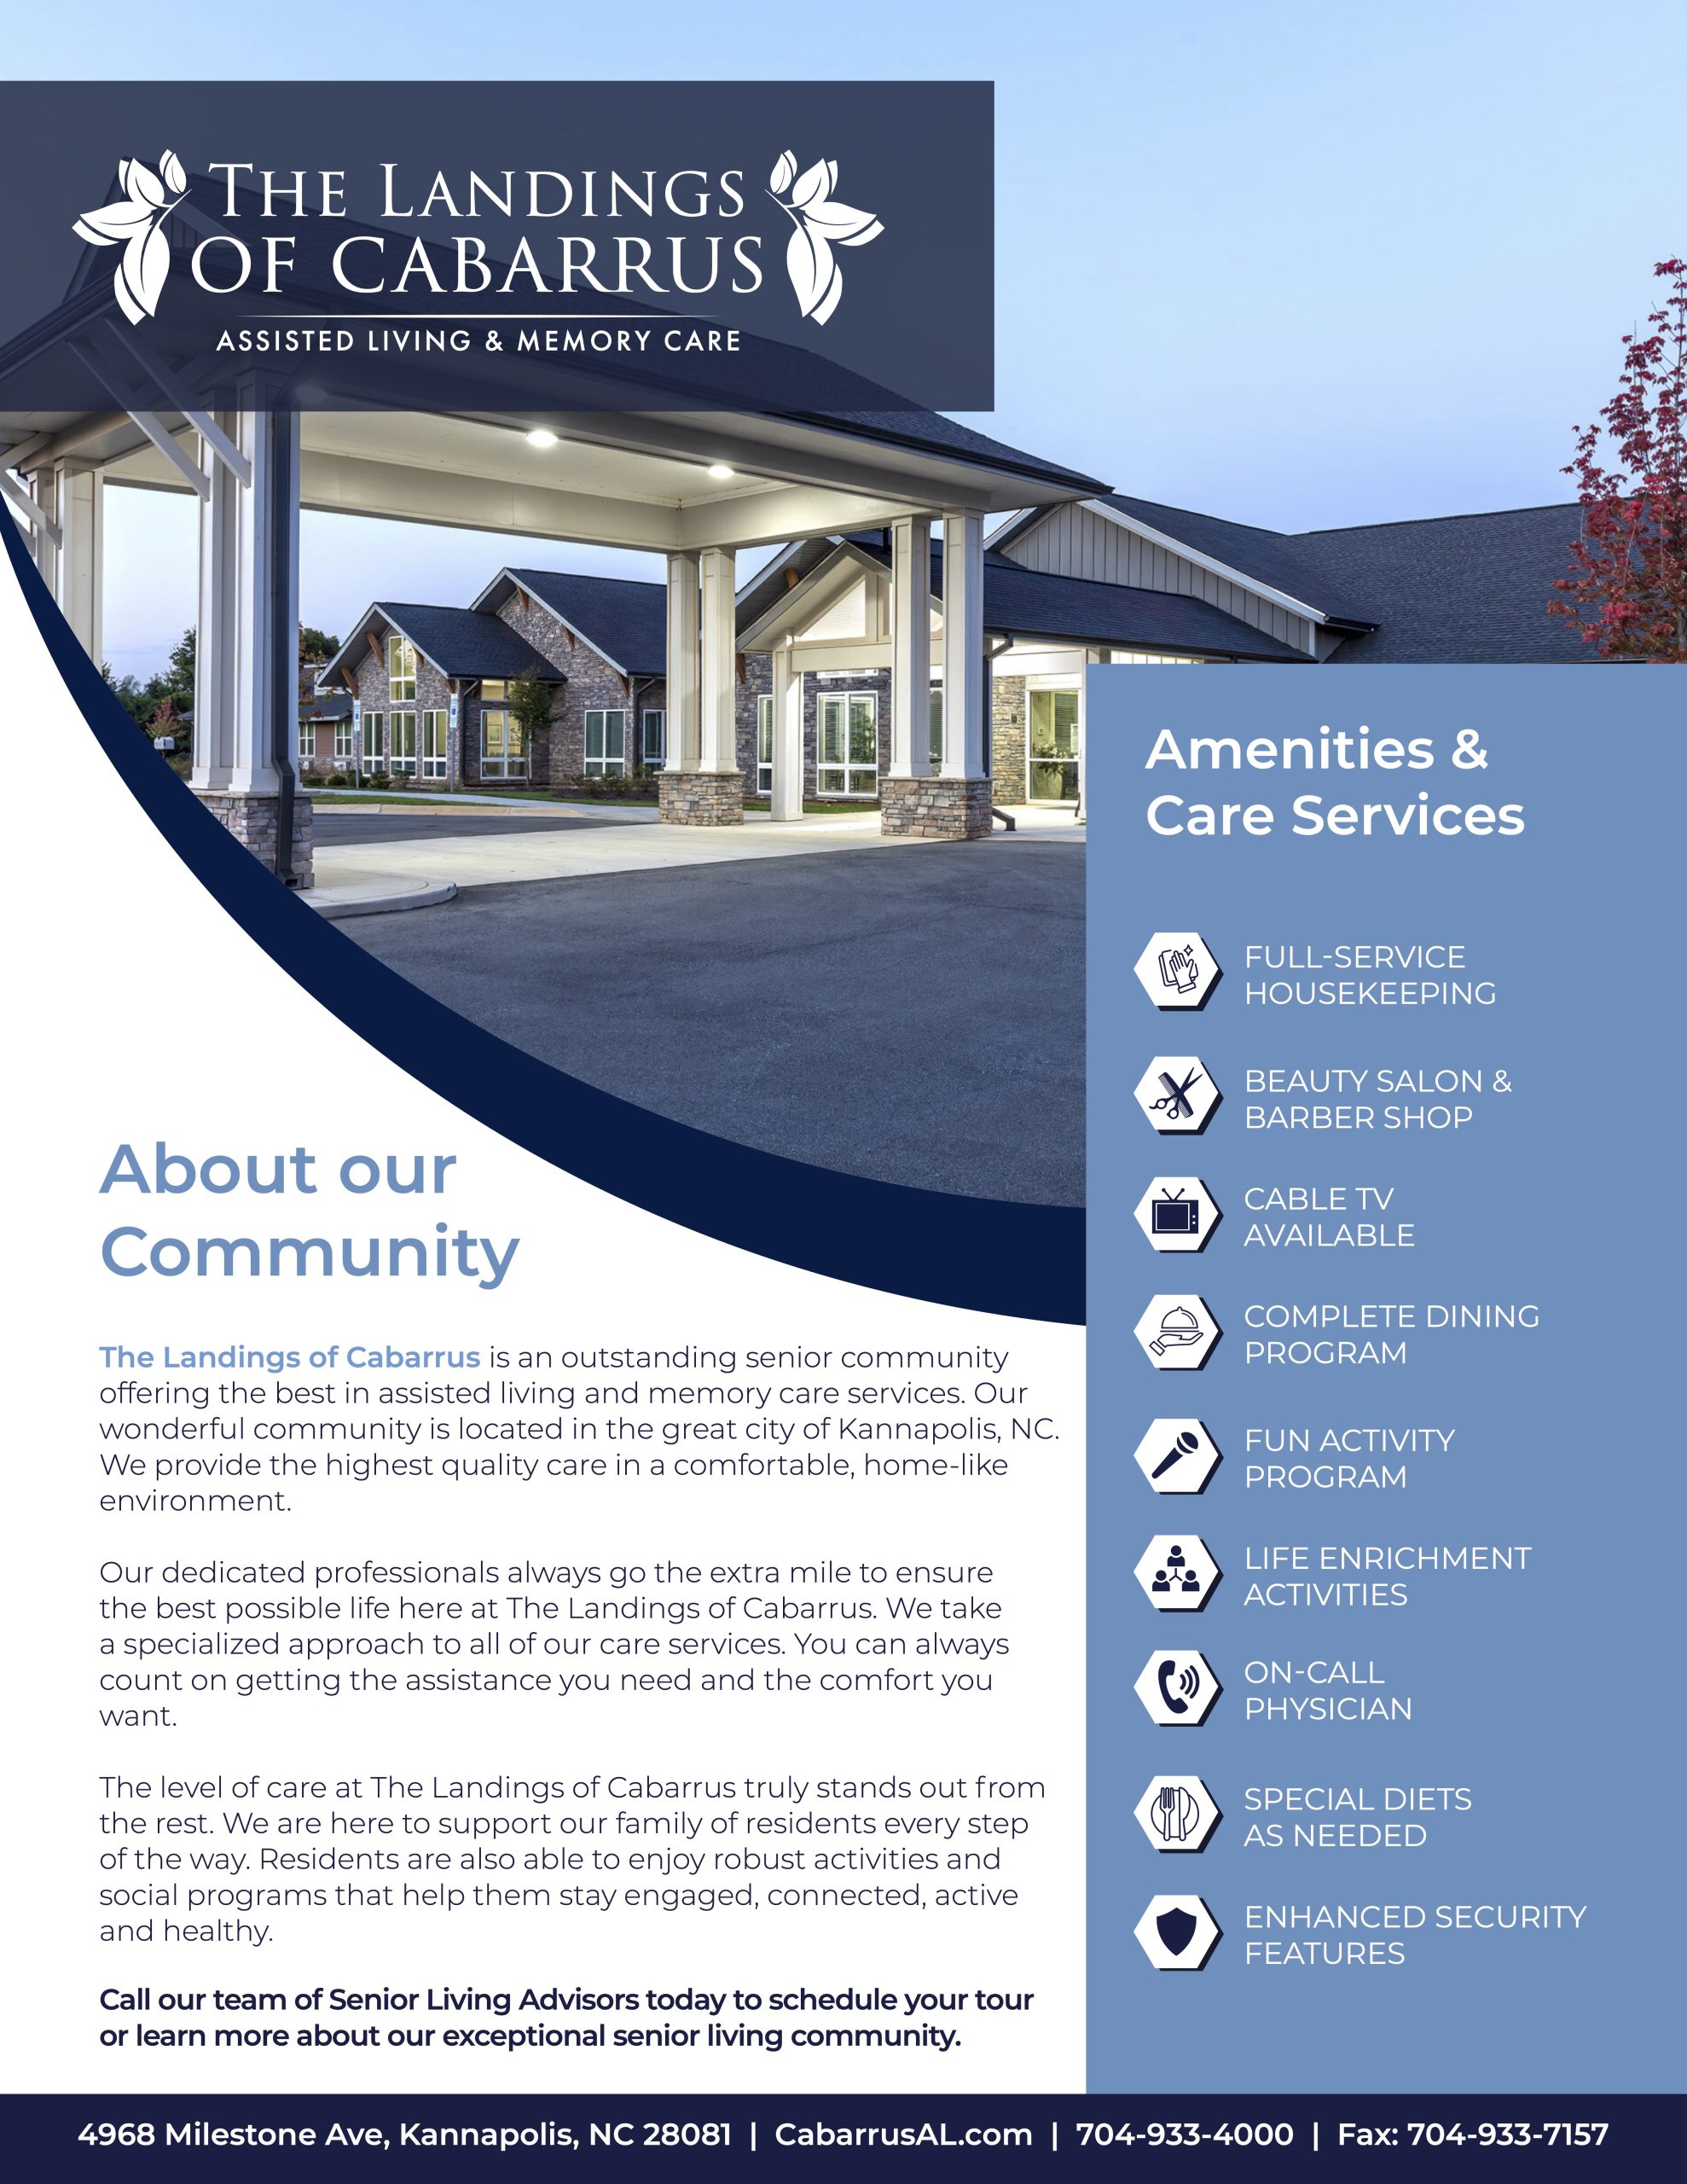 TLO Cabarrus - About our Services